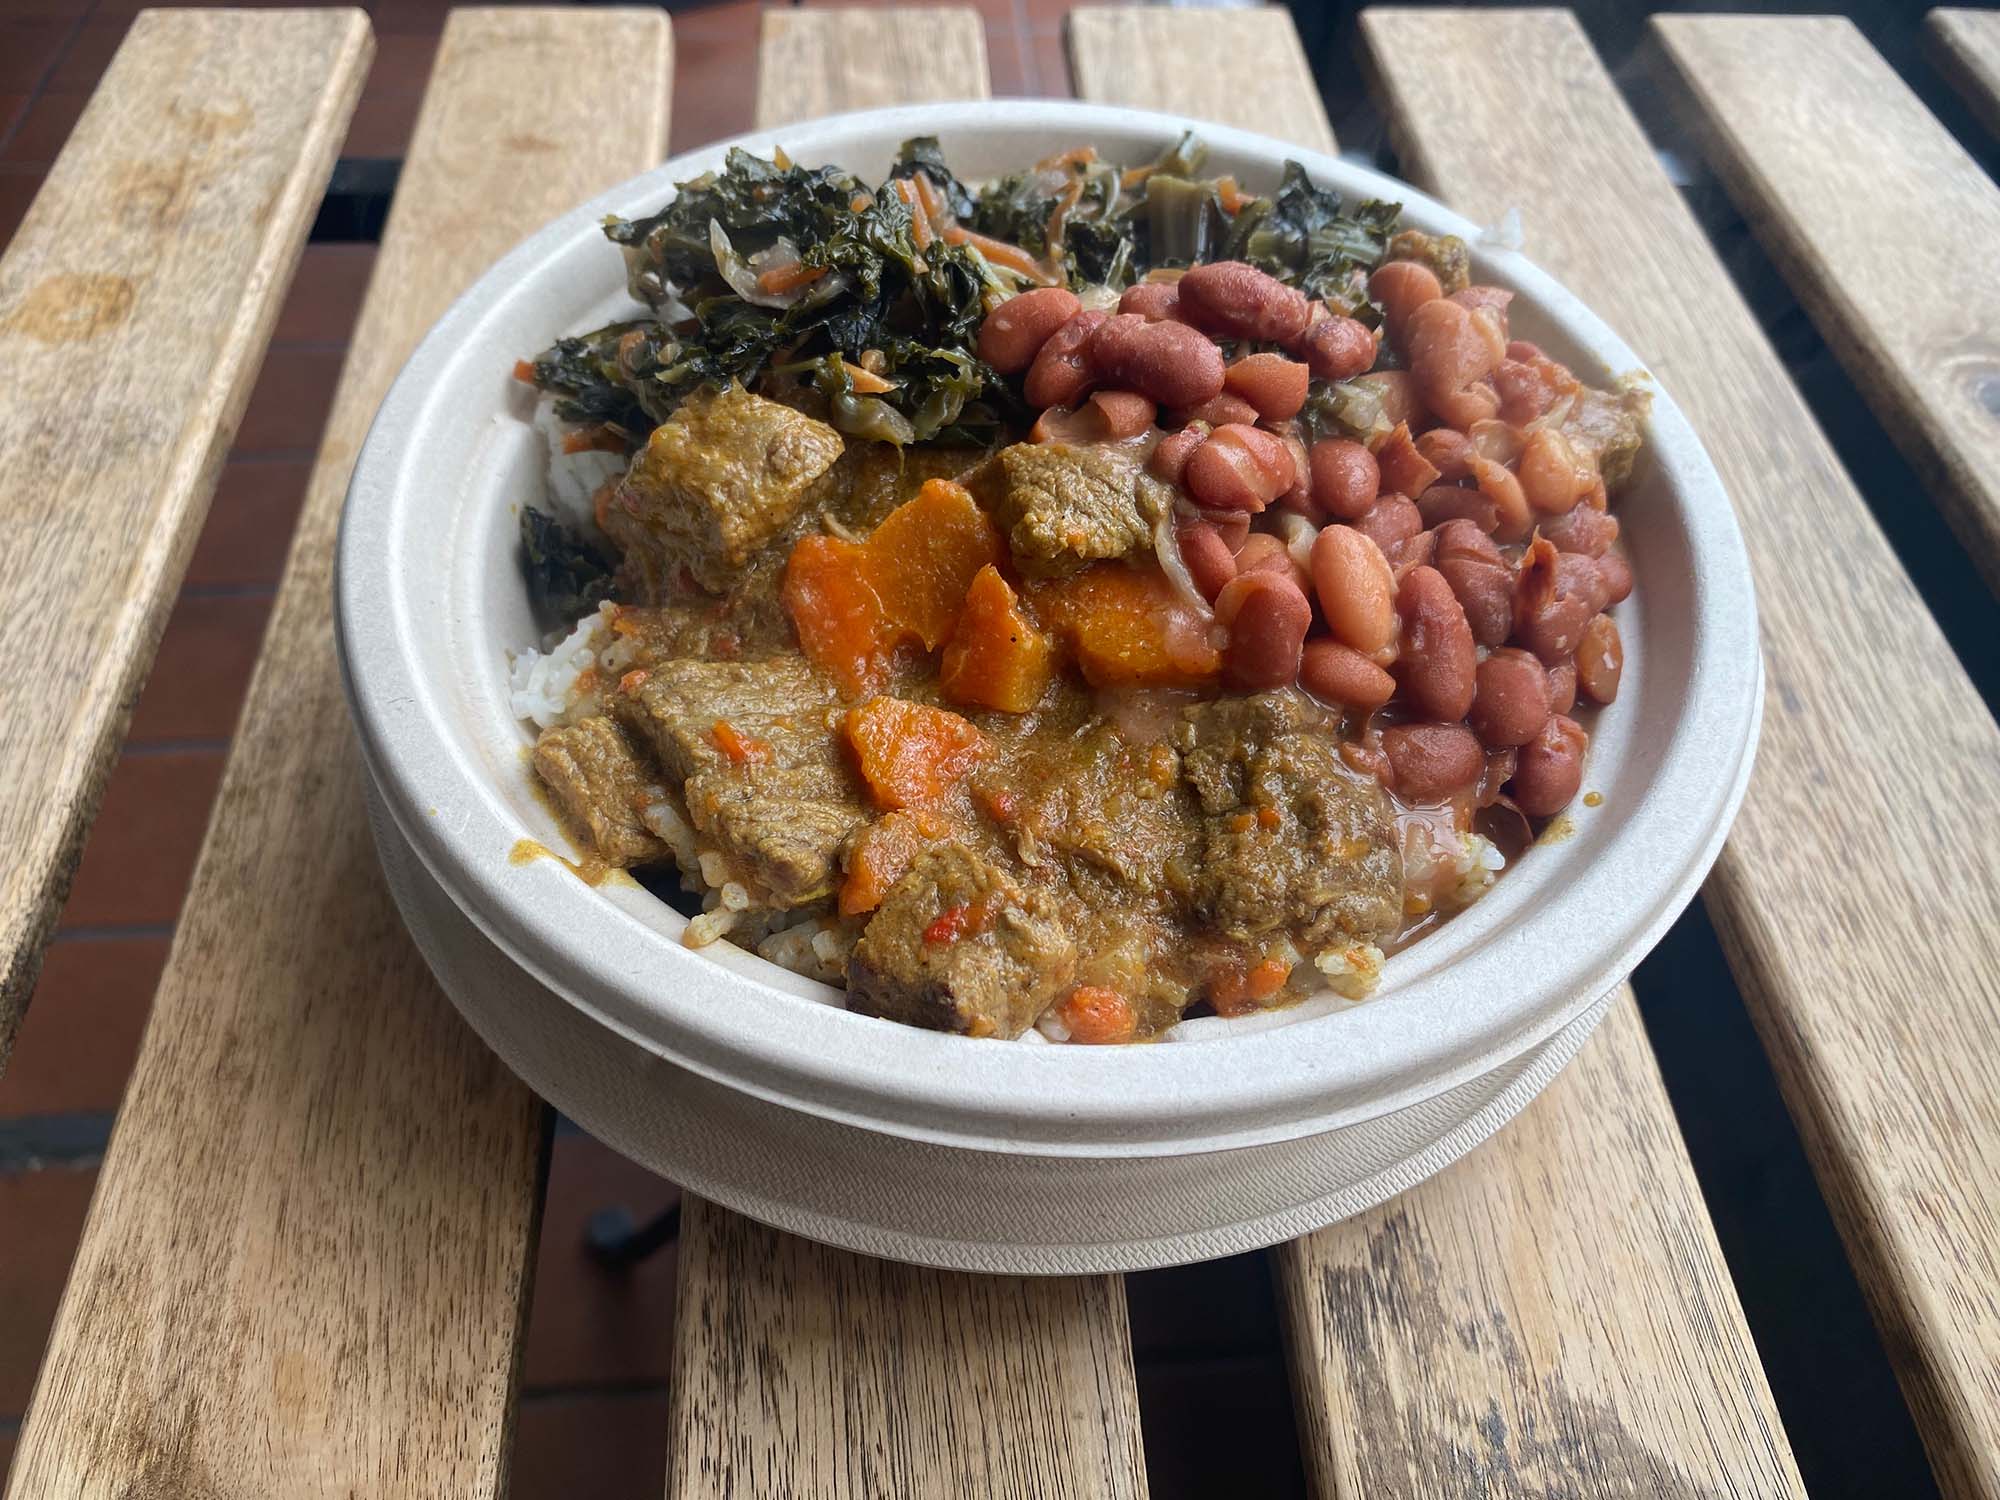 Beef curry bowl loaded with beans and greens.